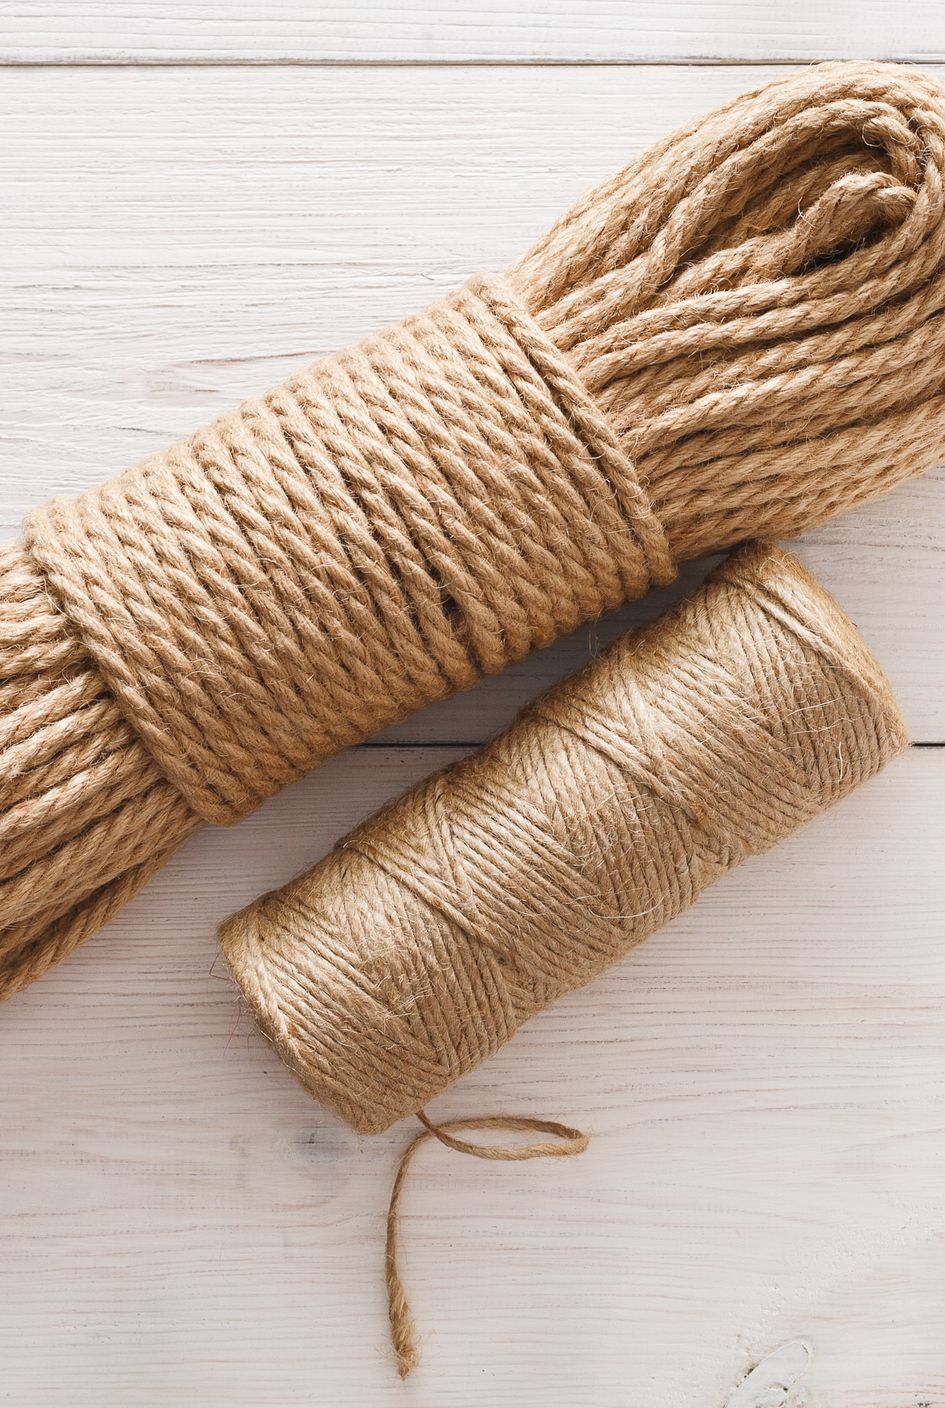 3 Easy Jute Craft Ideas/Rustic Home Decor Using Jute Twine Or Rope